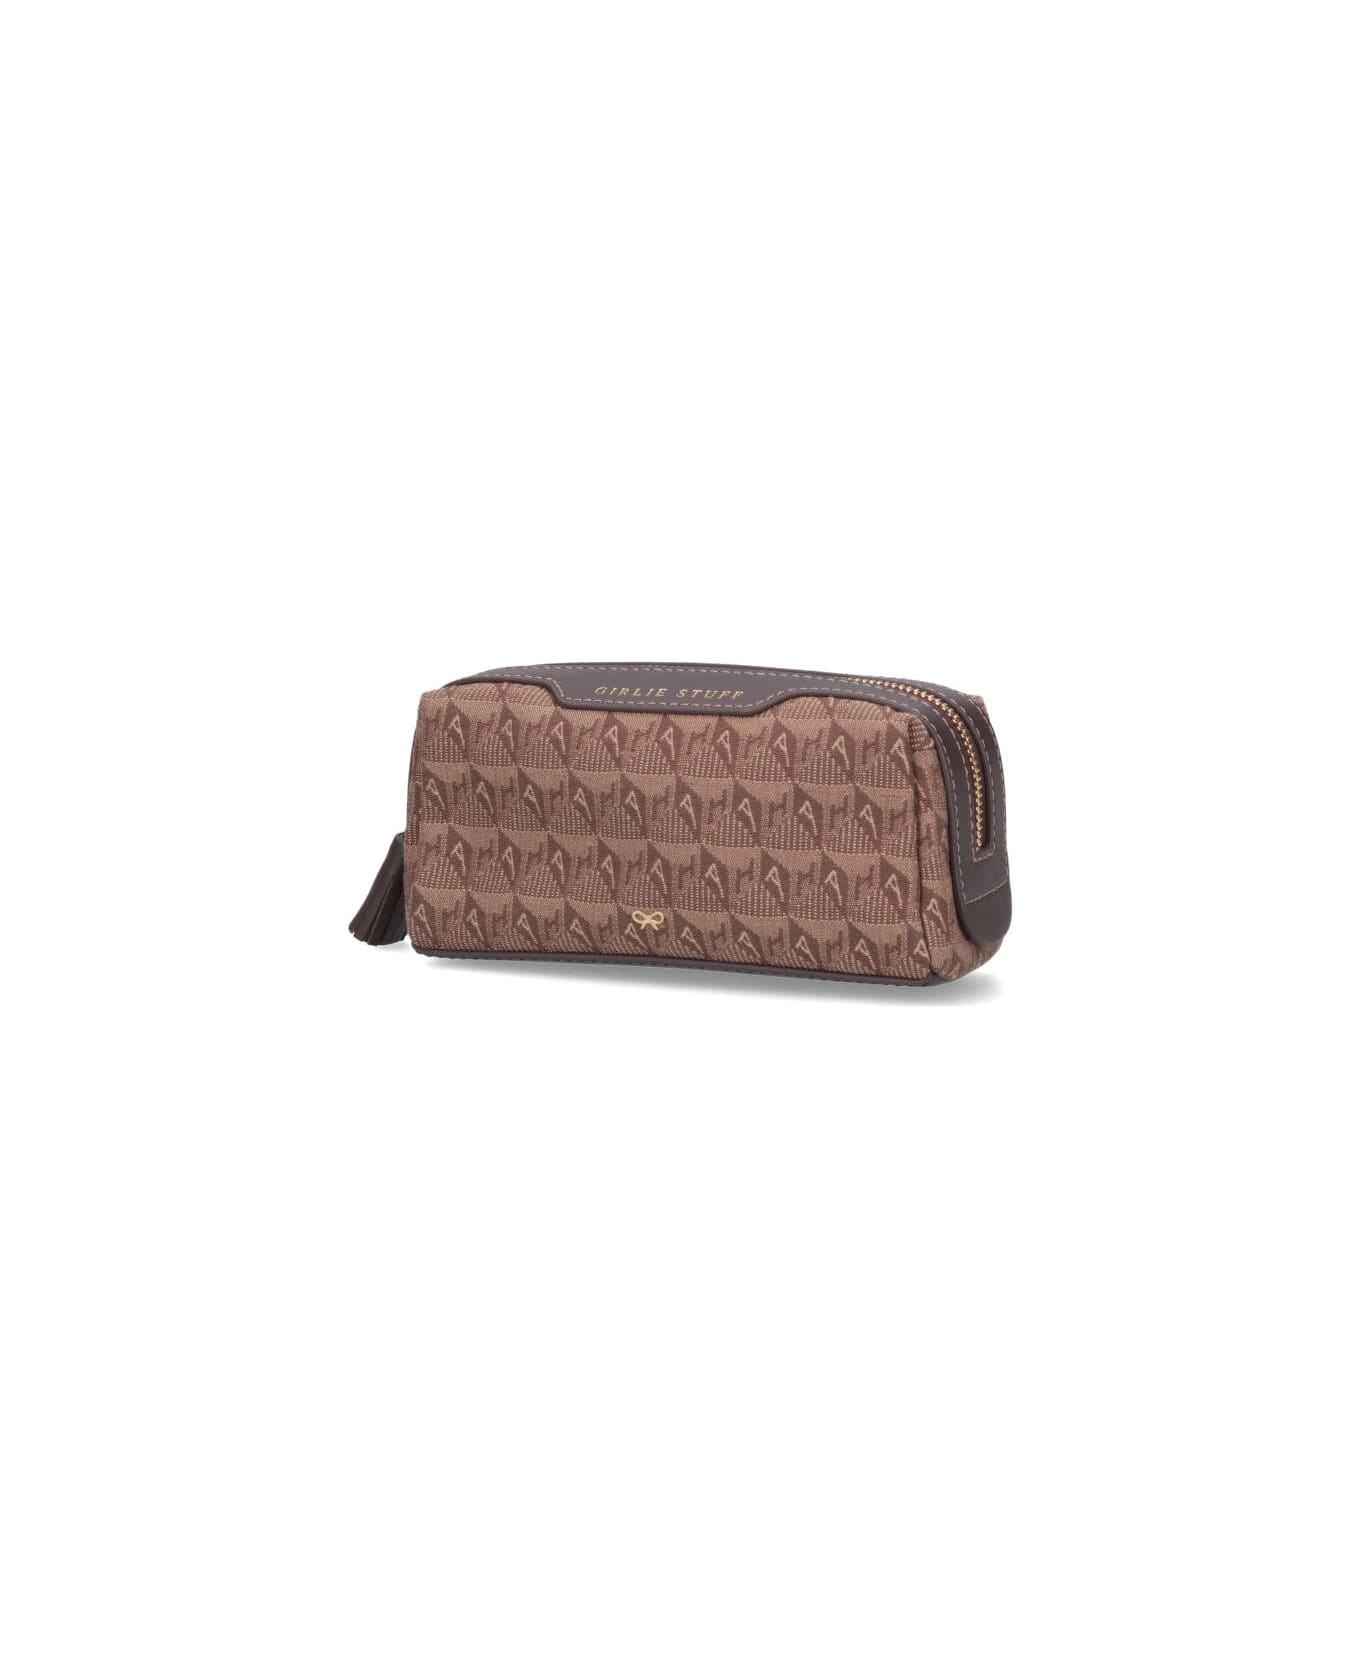 Anya Hindmarch Pouch "girlie Stuff" - Brown クラッチバッグ